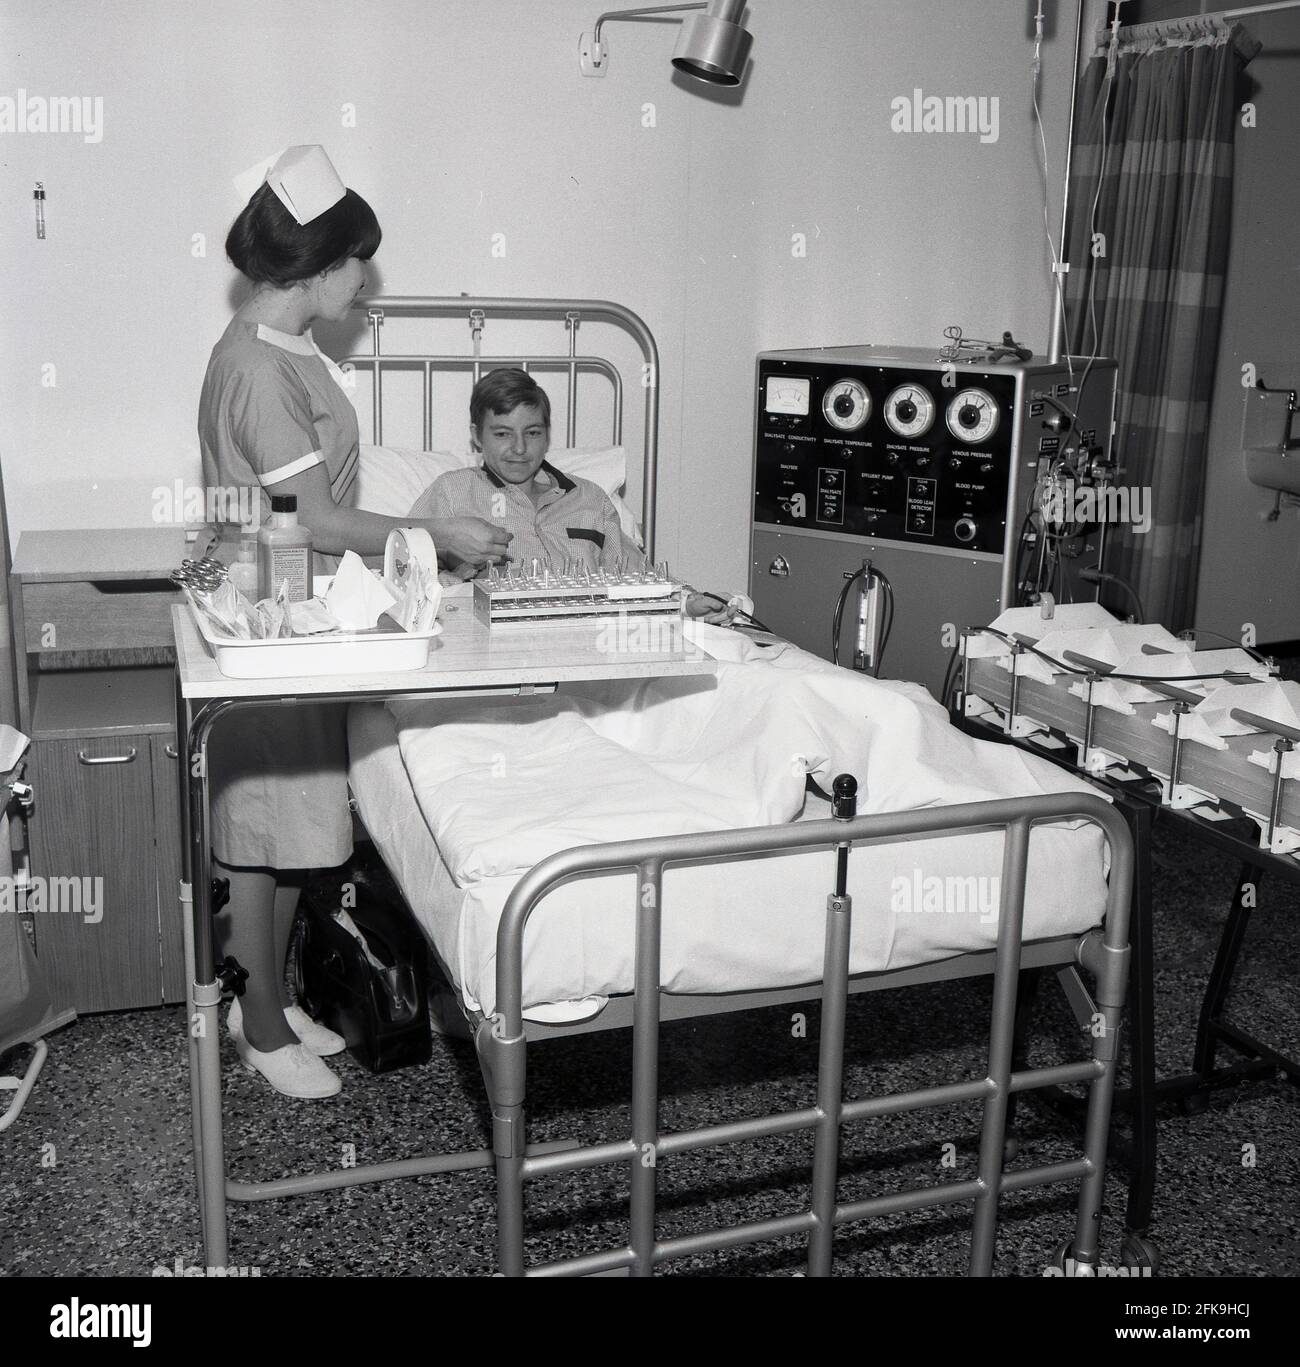 1960s, historical, a female nurse with test tubes of blood samples standing beside a young man lying in a hospital bed linked up to a large machine, a kidney dialaysis machine, South East London, England, UK. Dialysis is a medical treatment that filters and cleans the blood using a machine, which helps to keep the body in balance when the kidneys can't perform this function. Also known as Hemodialysis Machines. HD machines clean blood by passing it through a filter called a dialyzer. Stock Photo